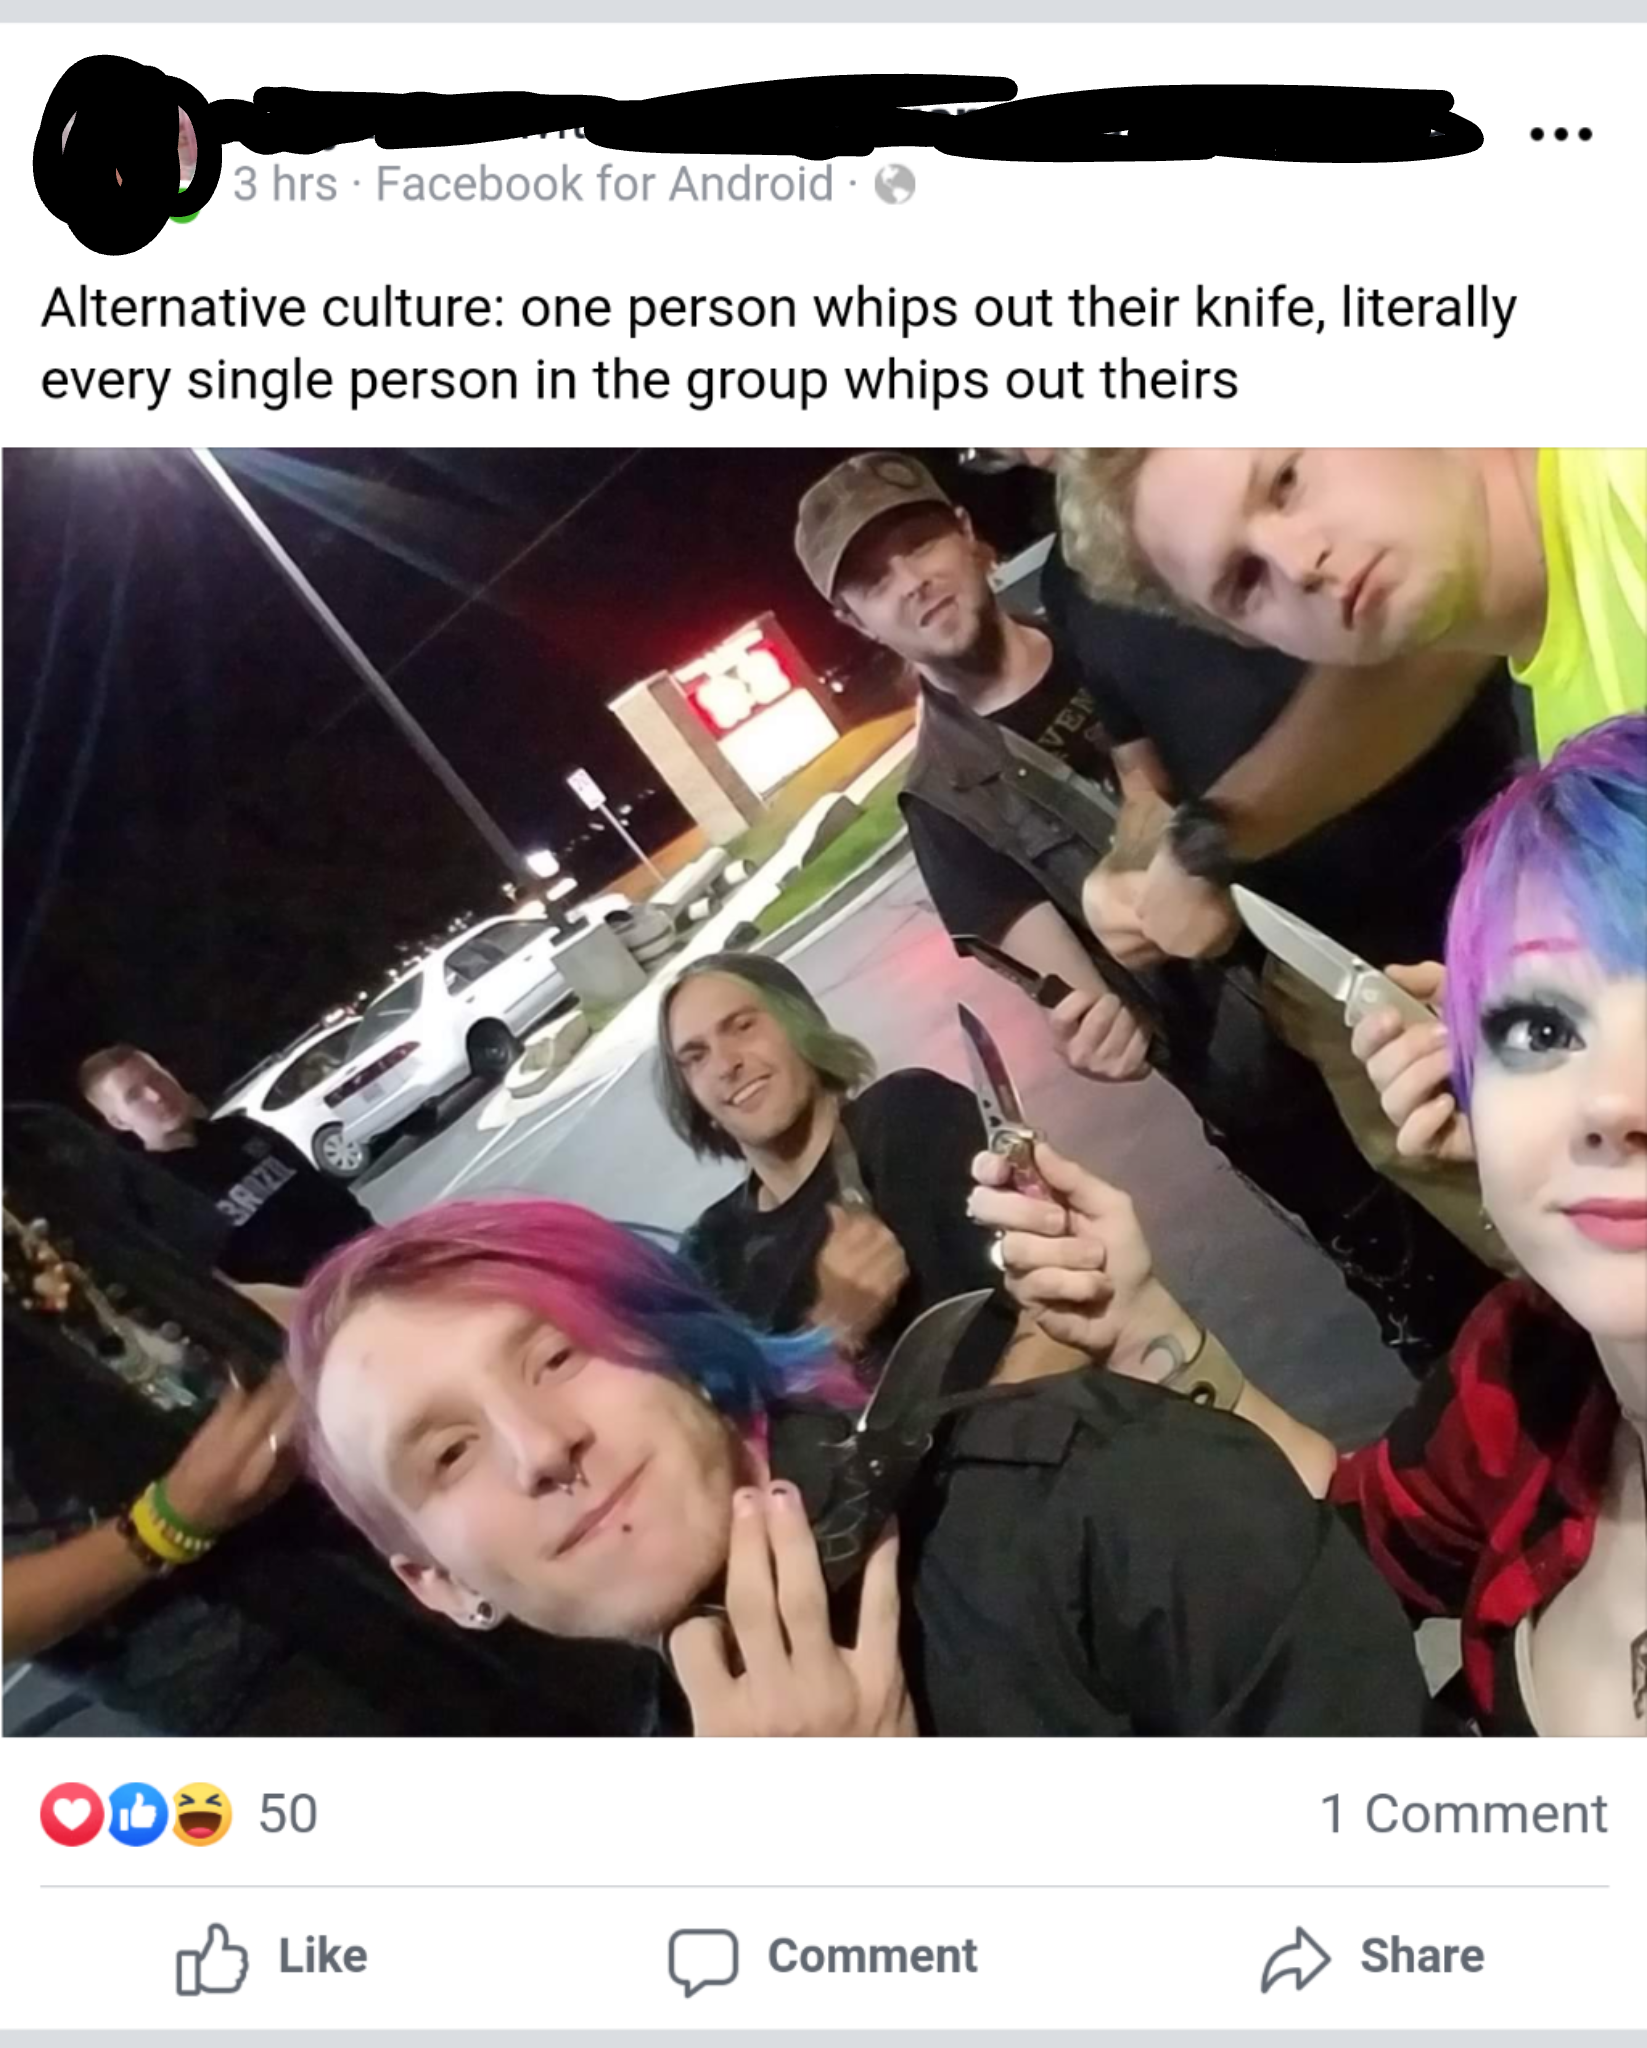 selfie - 3 hrs Facebook for Android Alternative culture one person whips out their knife, literally every single person in the group whips out theirs Od 50 1 Comment Comment